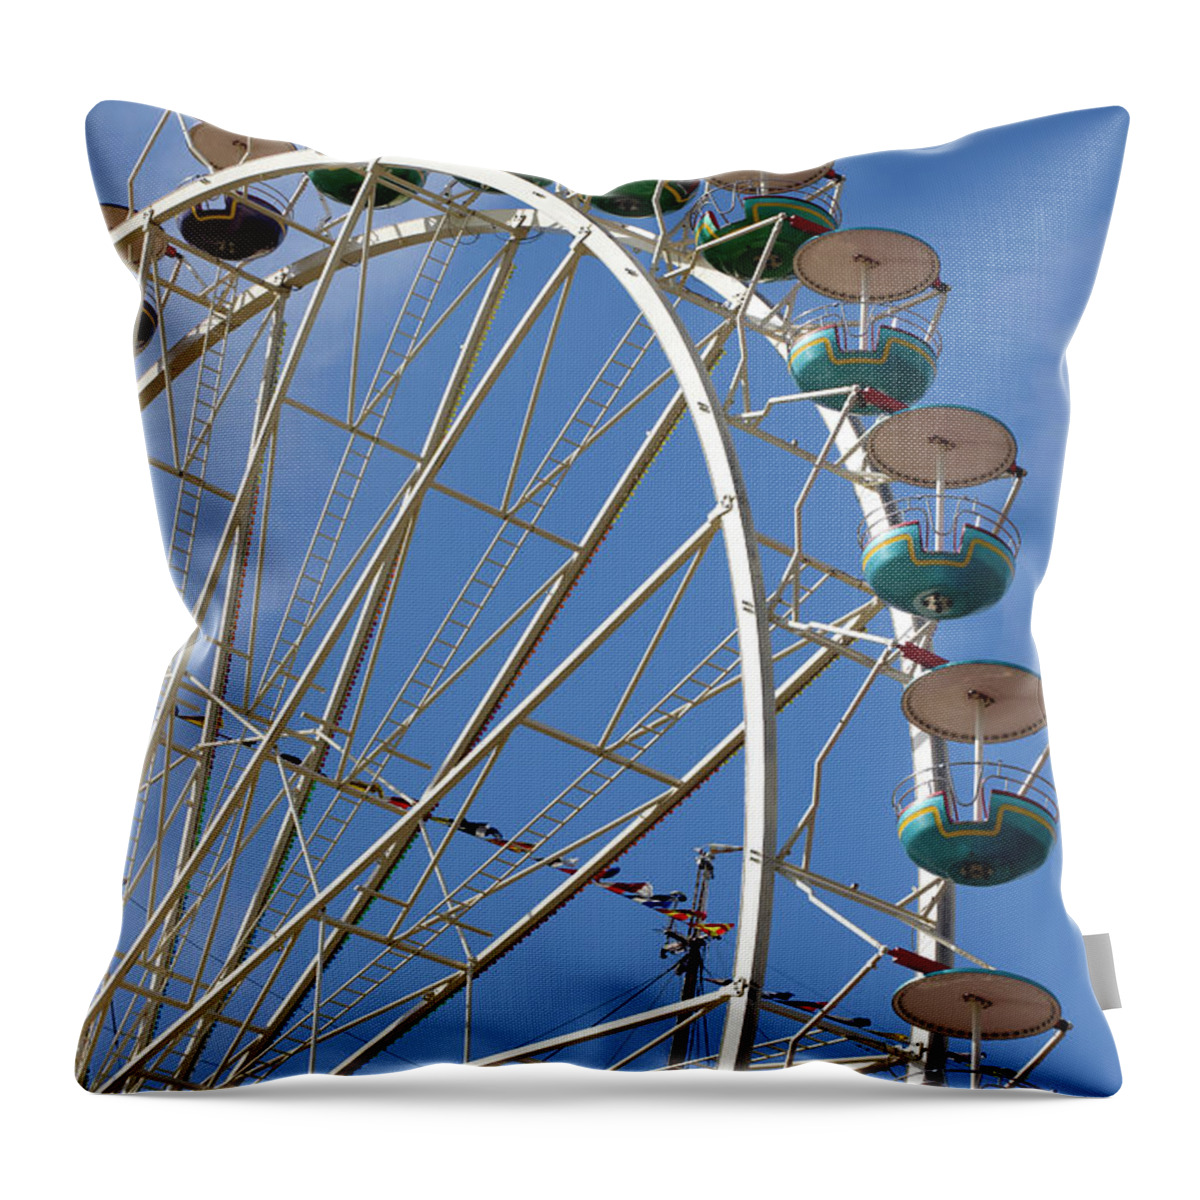 Sweden Throw Pillow featuring the photograph Ferris Wheel Against Sky by Bjurling, Hans